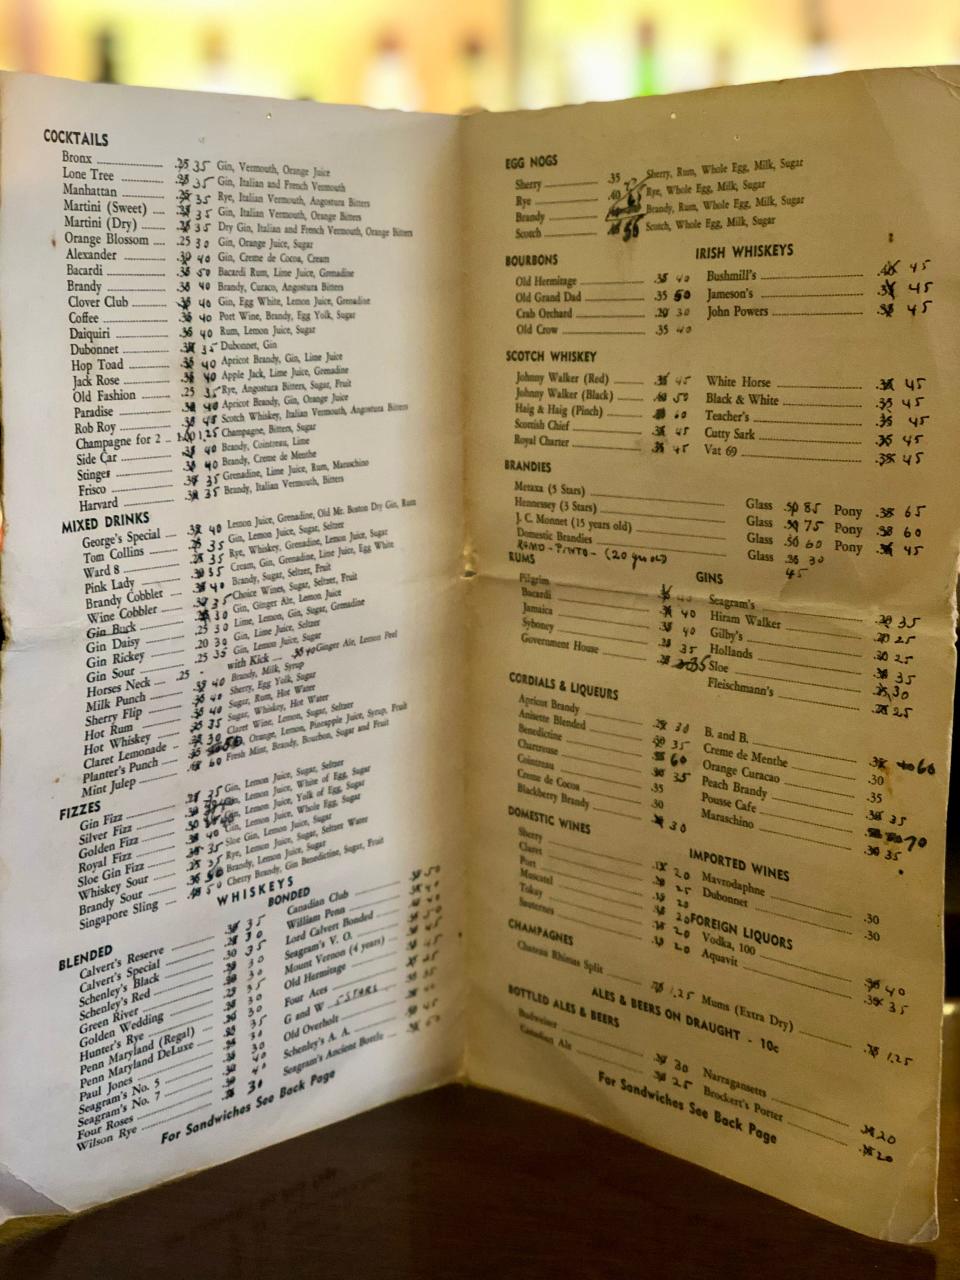 The extensive drink menu from when George's Coney Island played host to a bustling nightlife.